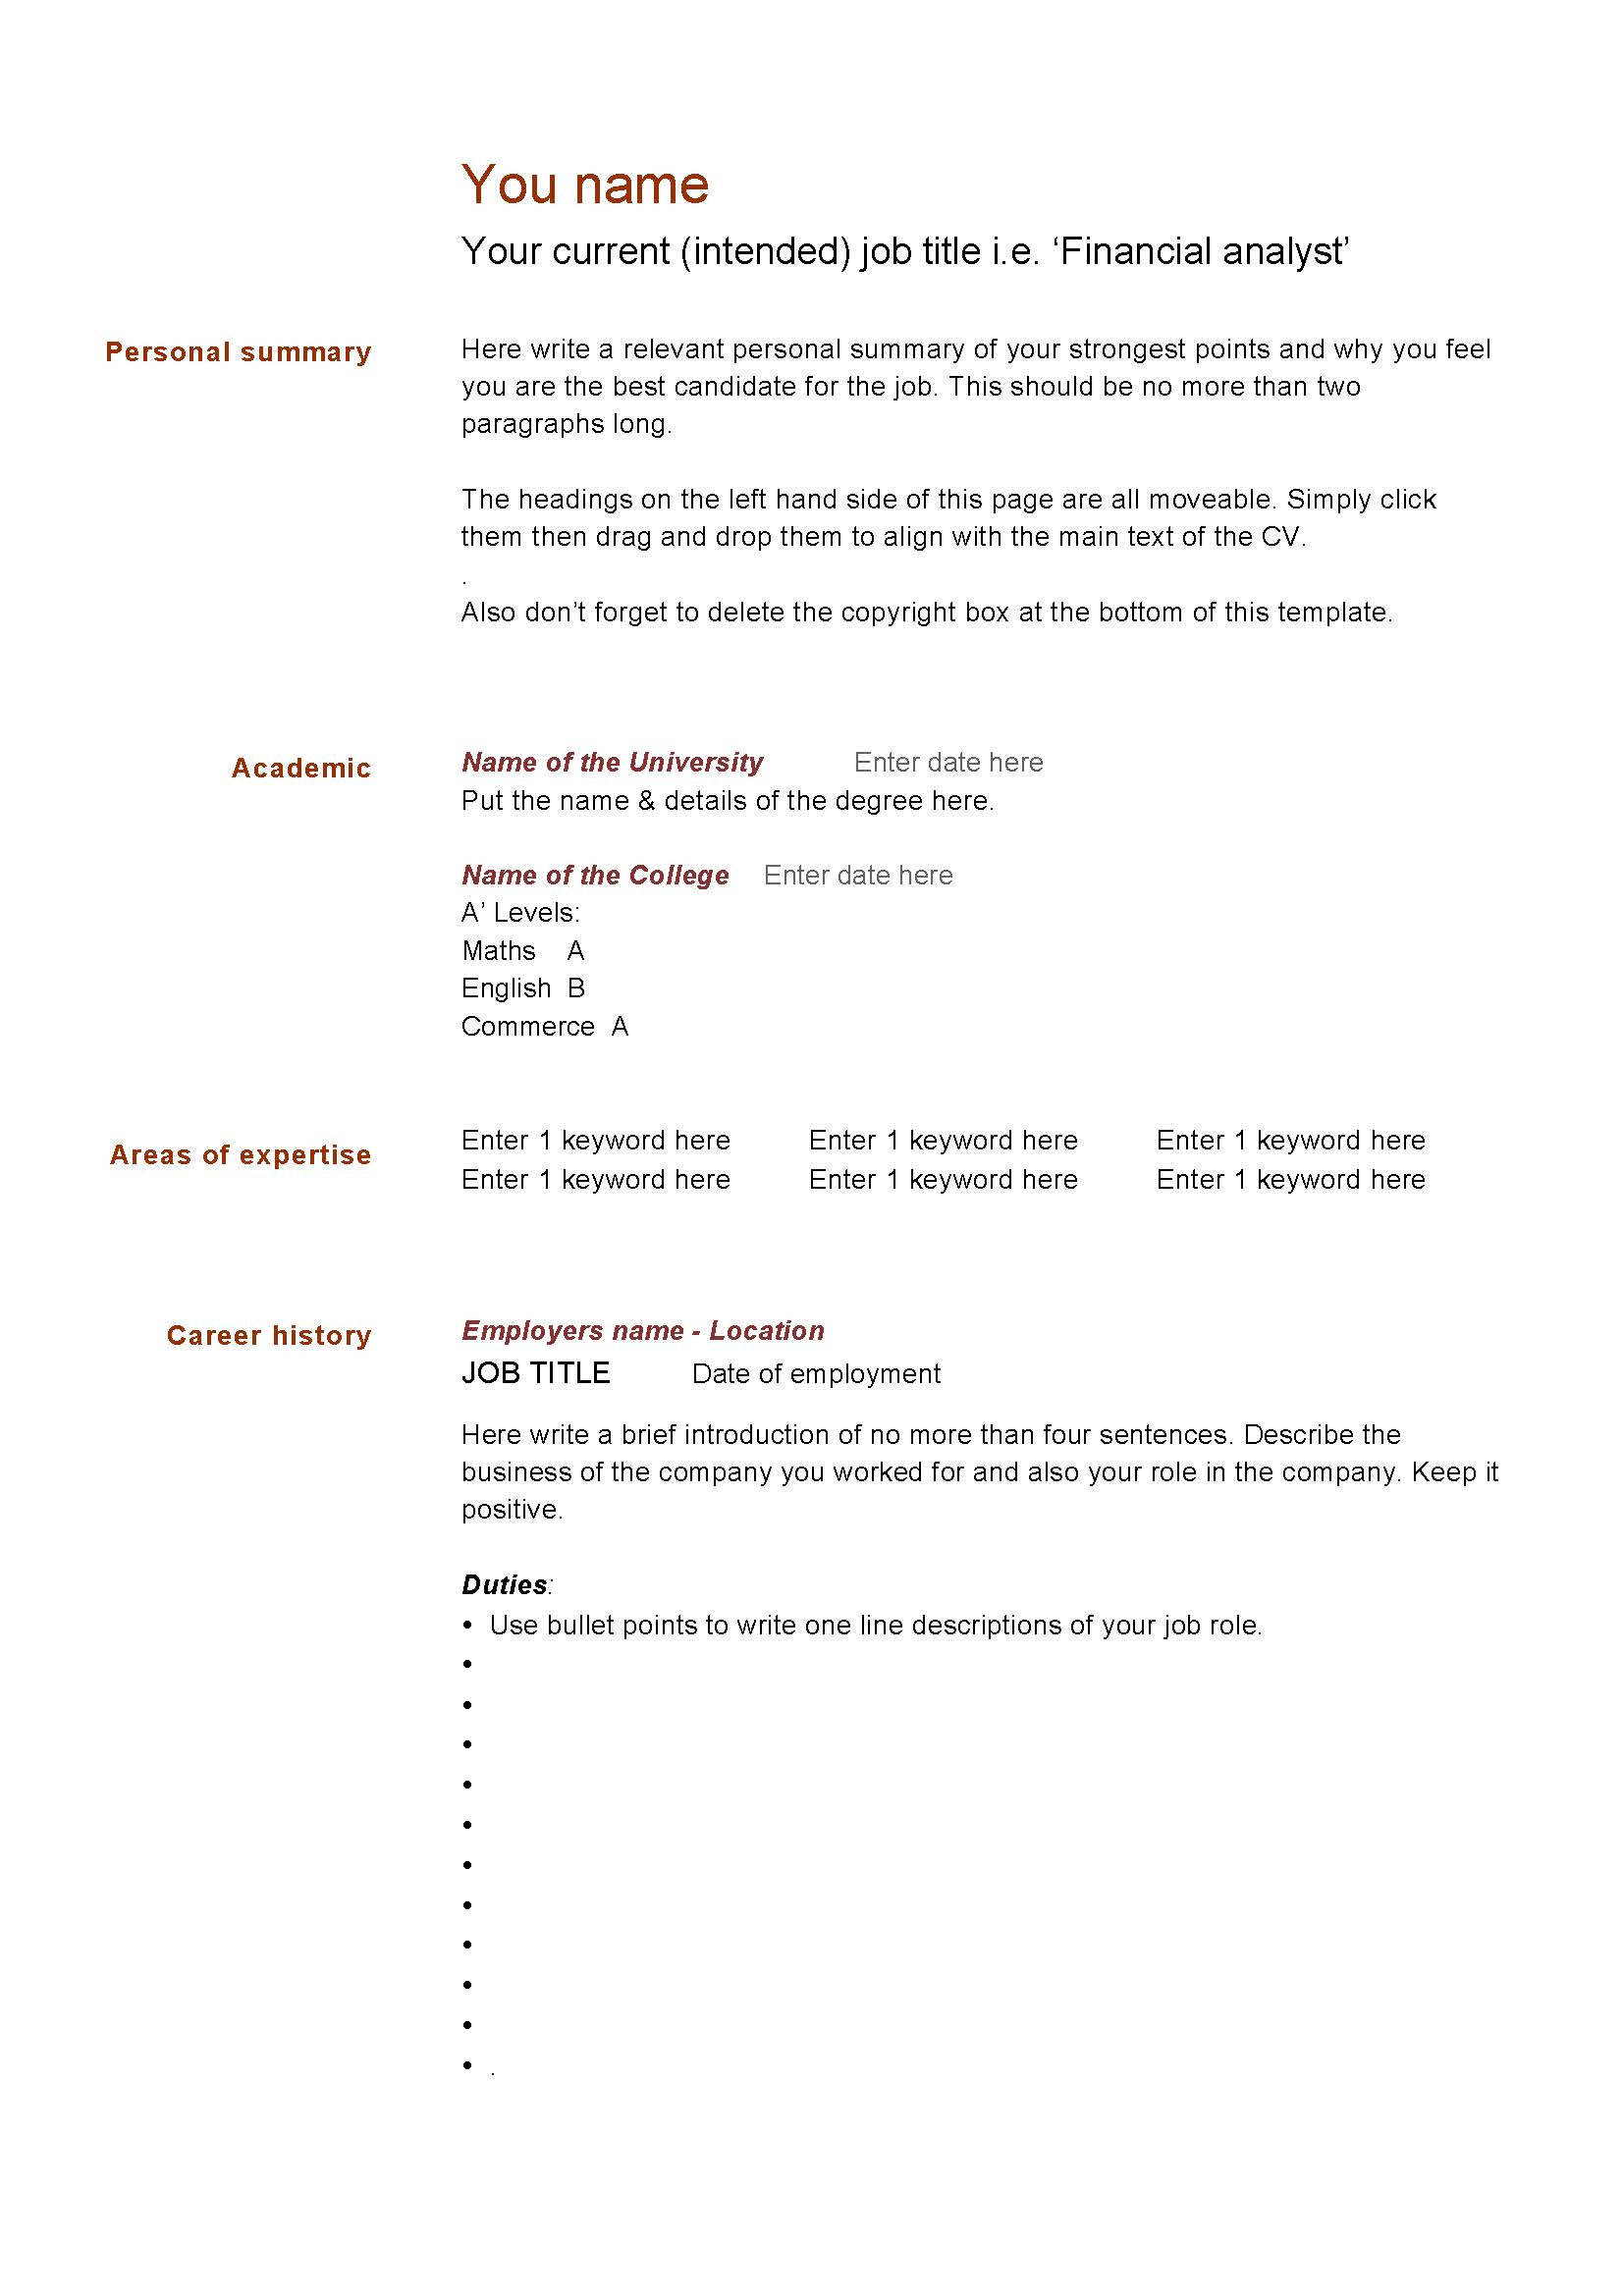 Download Blank Cv Template Microsoft Word - Pdf Format | E with regard to Free Blank Cv Template Download